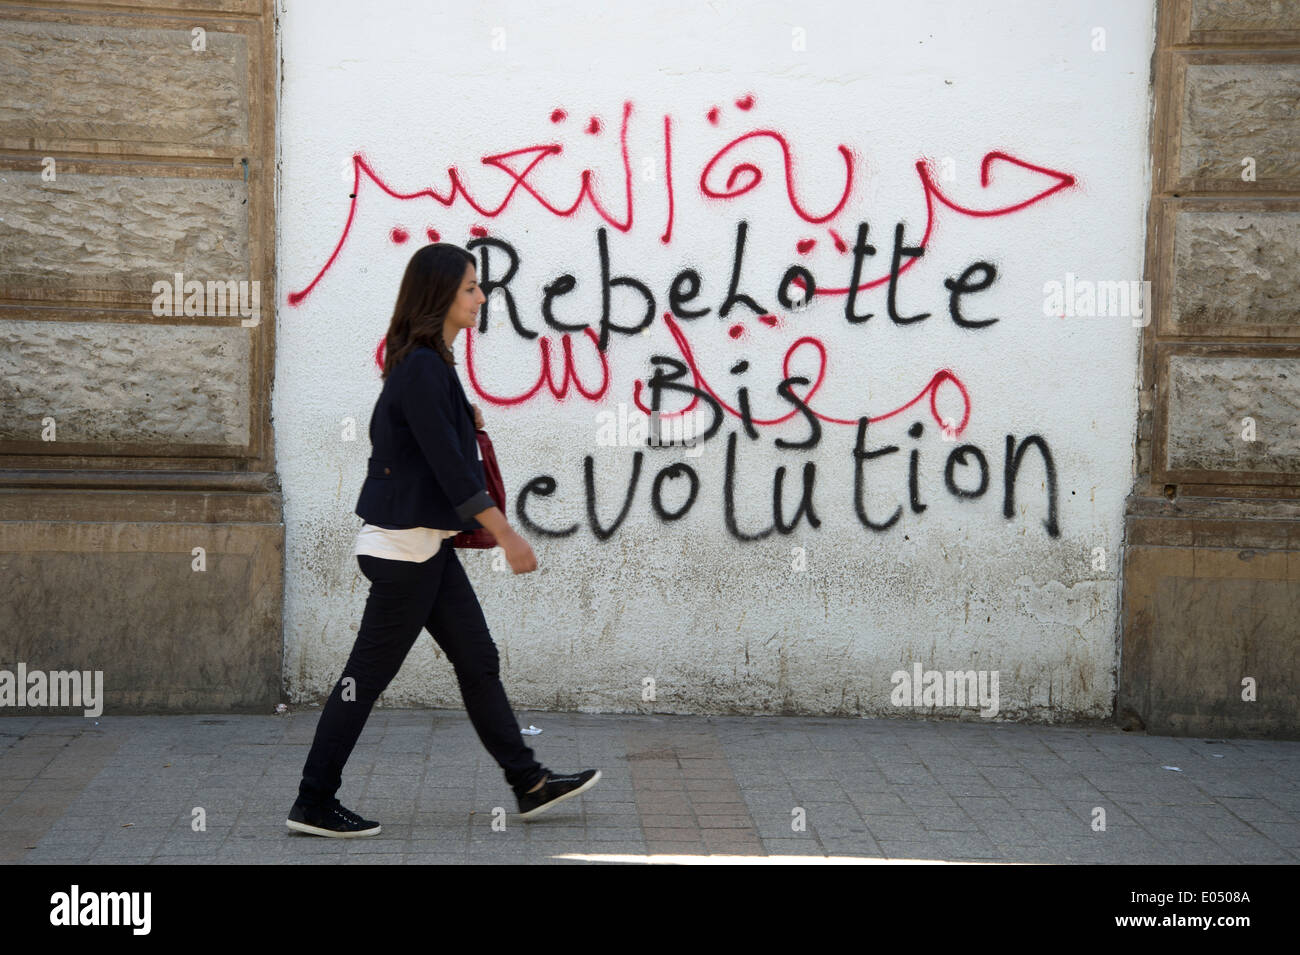 Tunisia 2014. A woman wearing jeans walks past  slogans saying revolution written on a wall Stock Photo